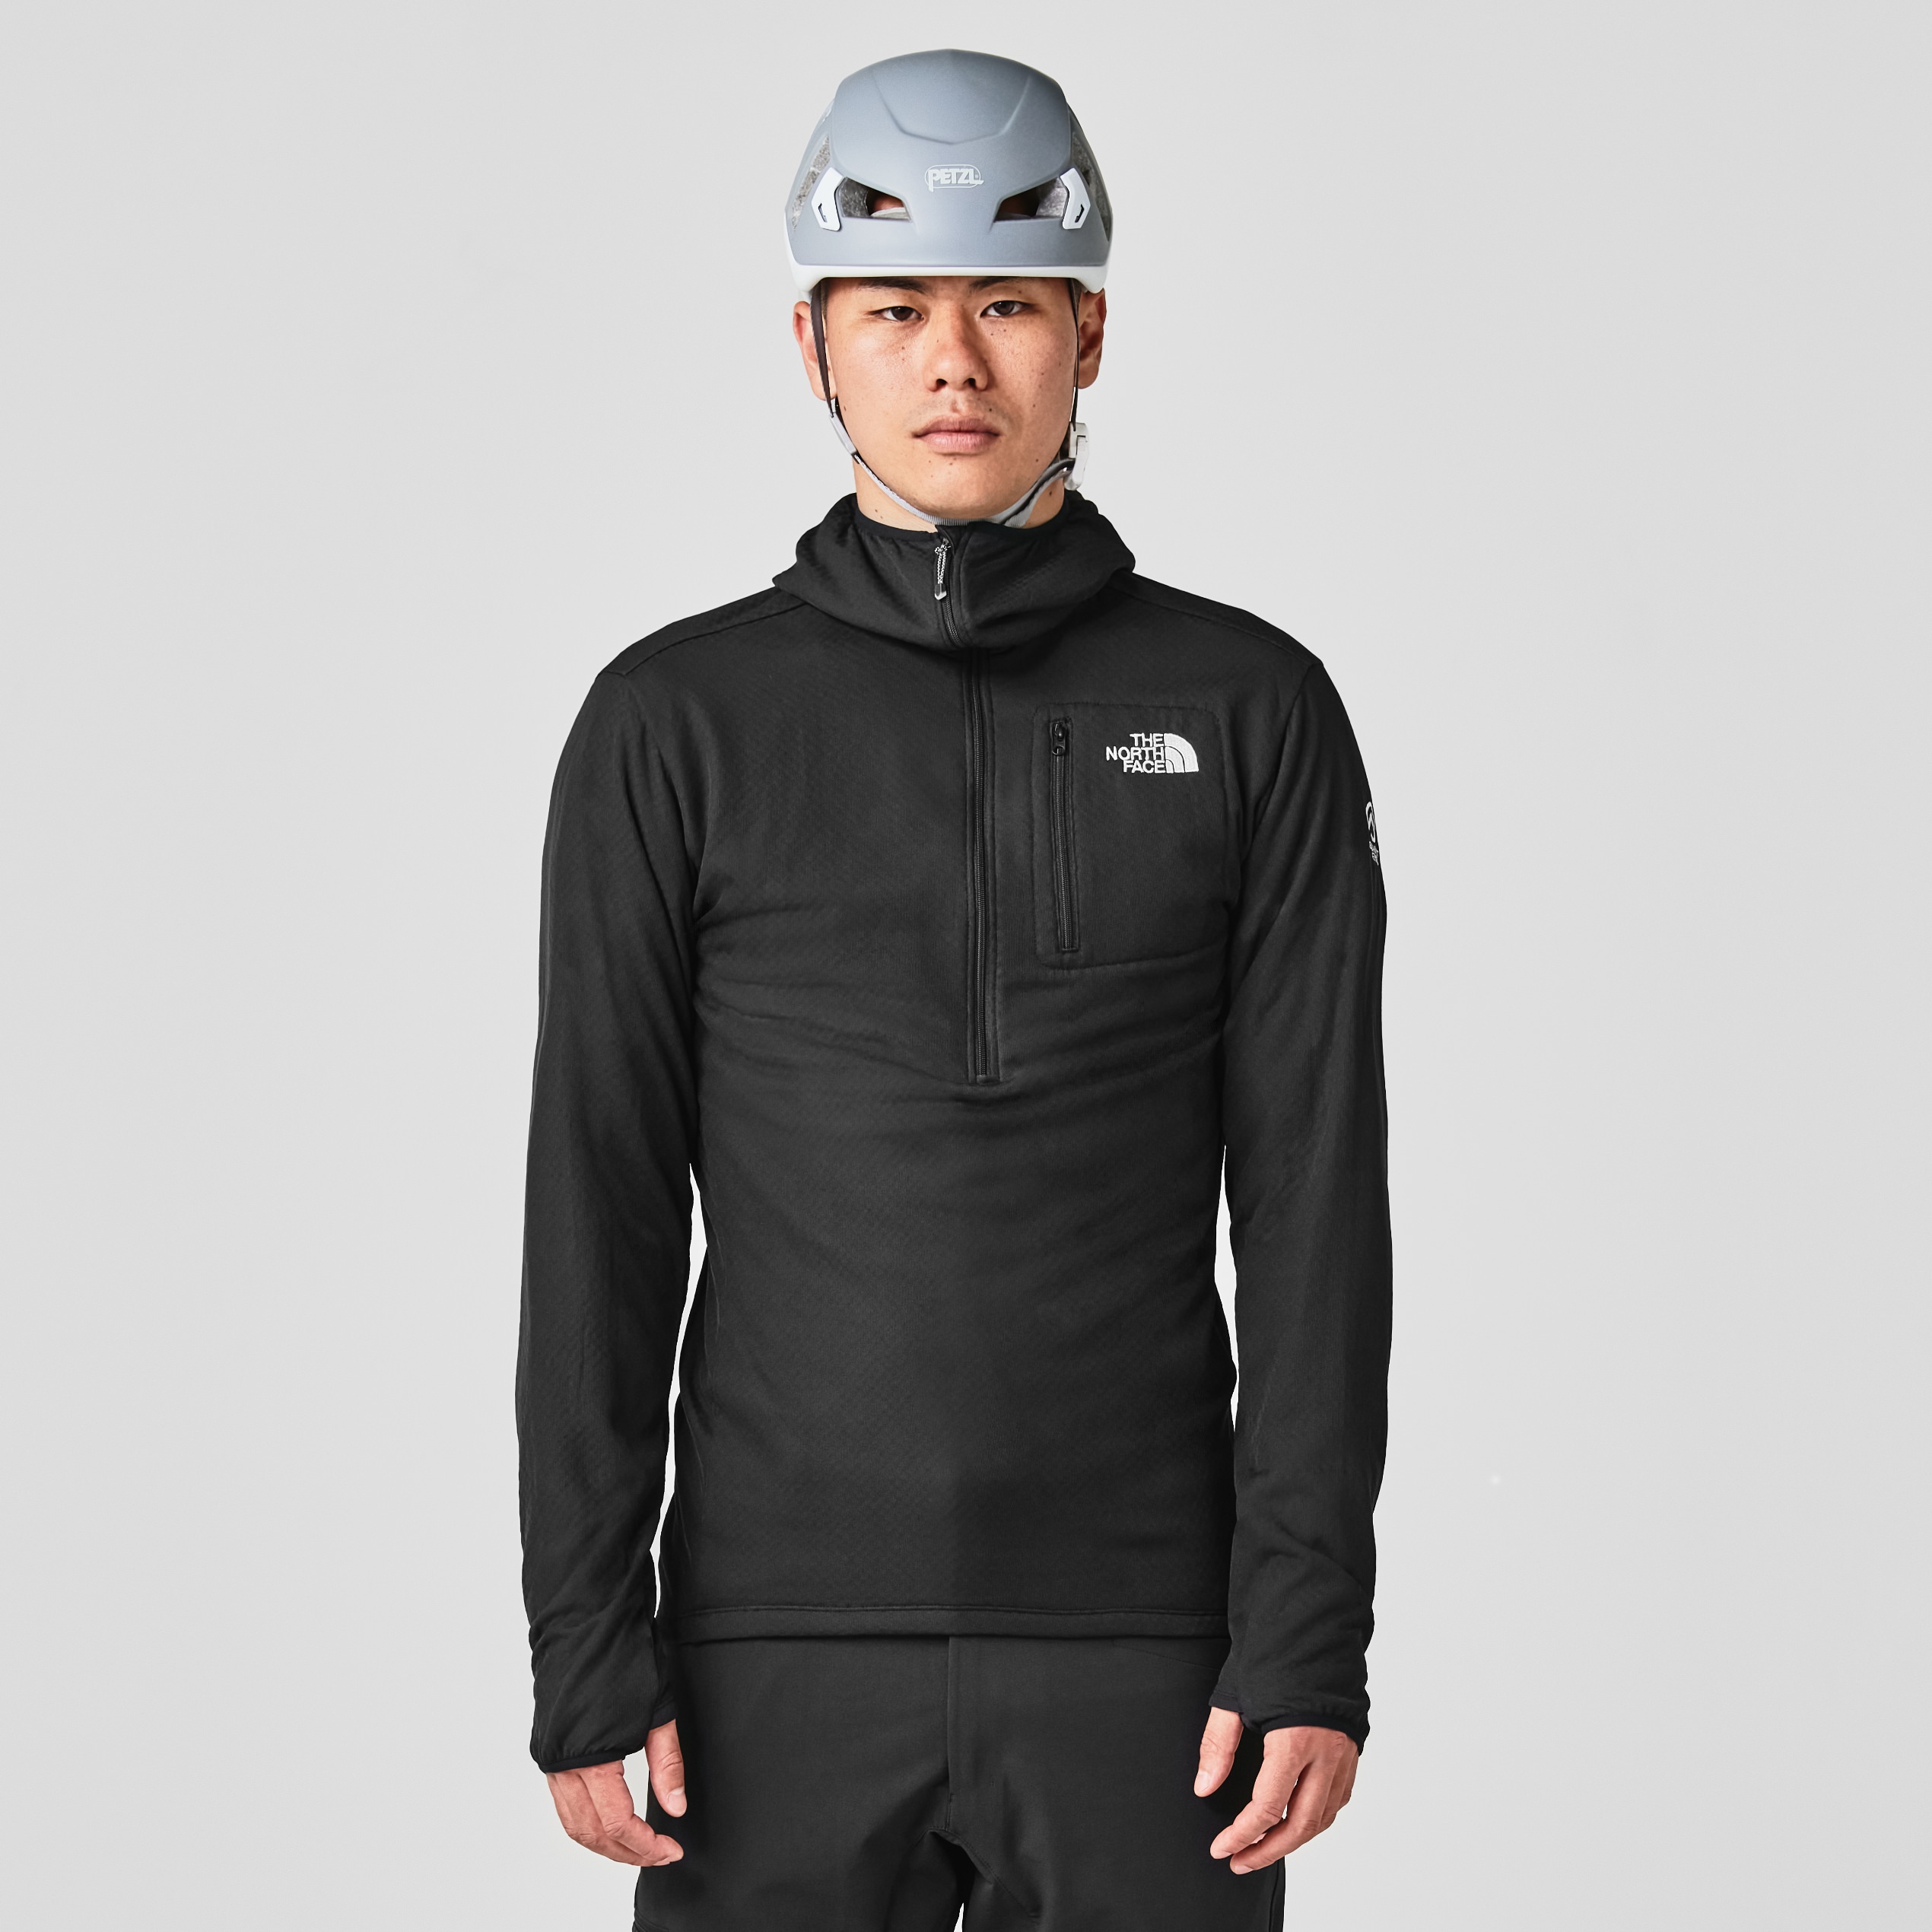 EXPEDITION GRID FLEECE HOODIE (NL62121 / UNISEX) - THE NORTH FACE 